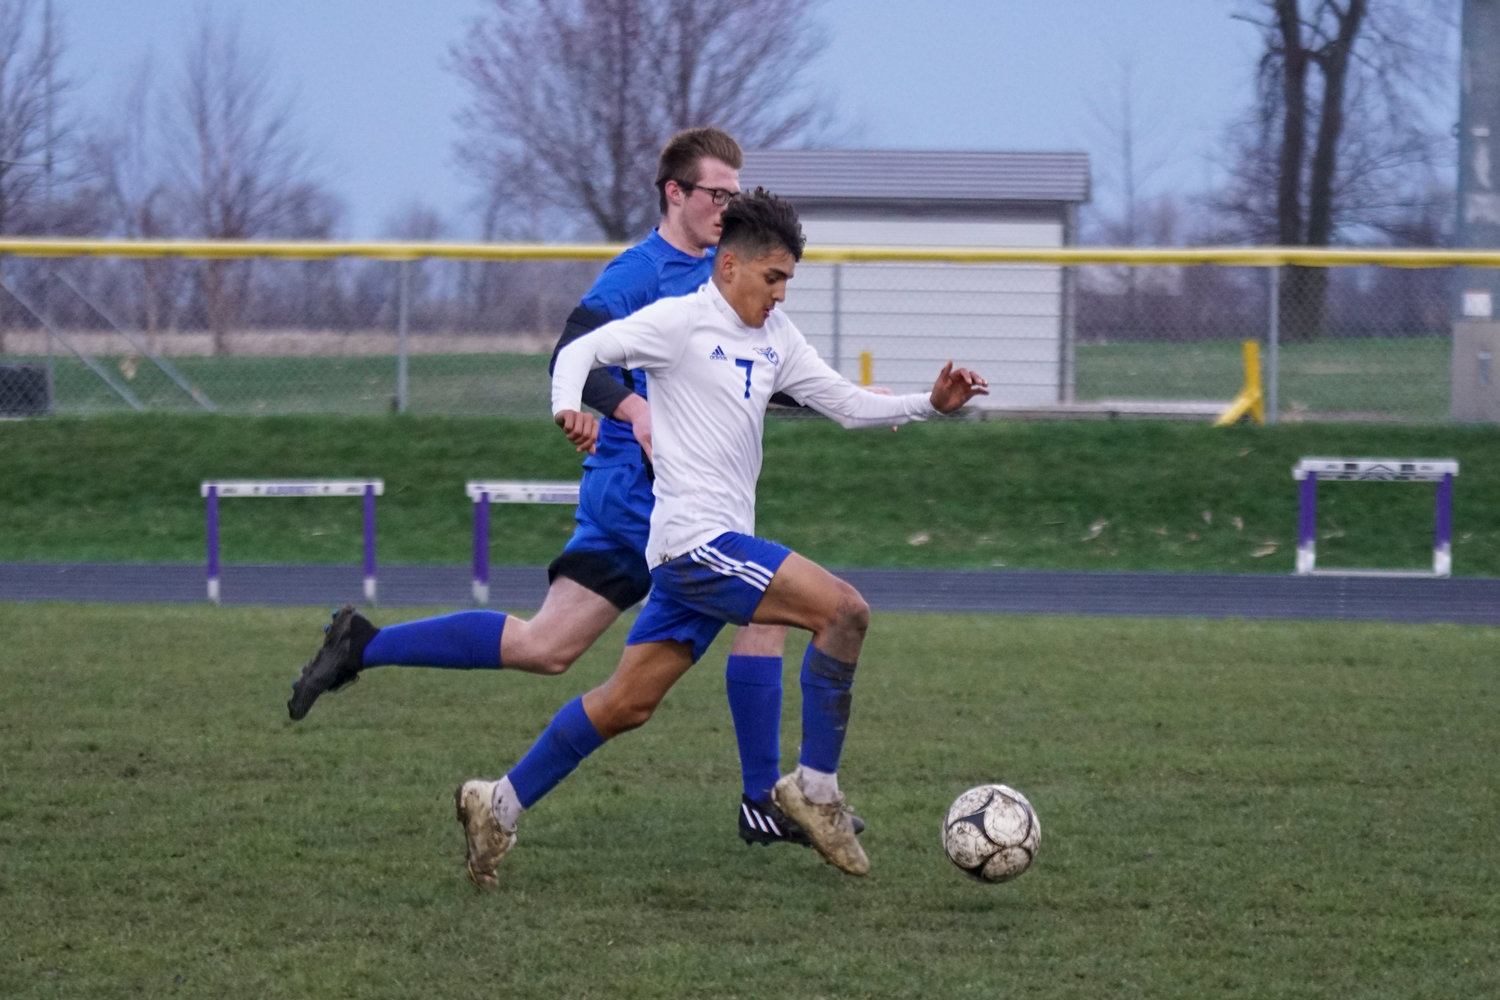 Juan Mateo had quite the week in scoring goals for West Liberty.